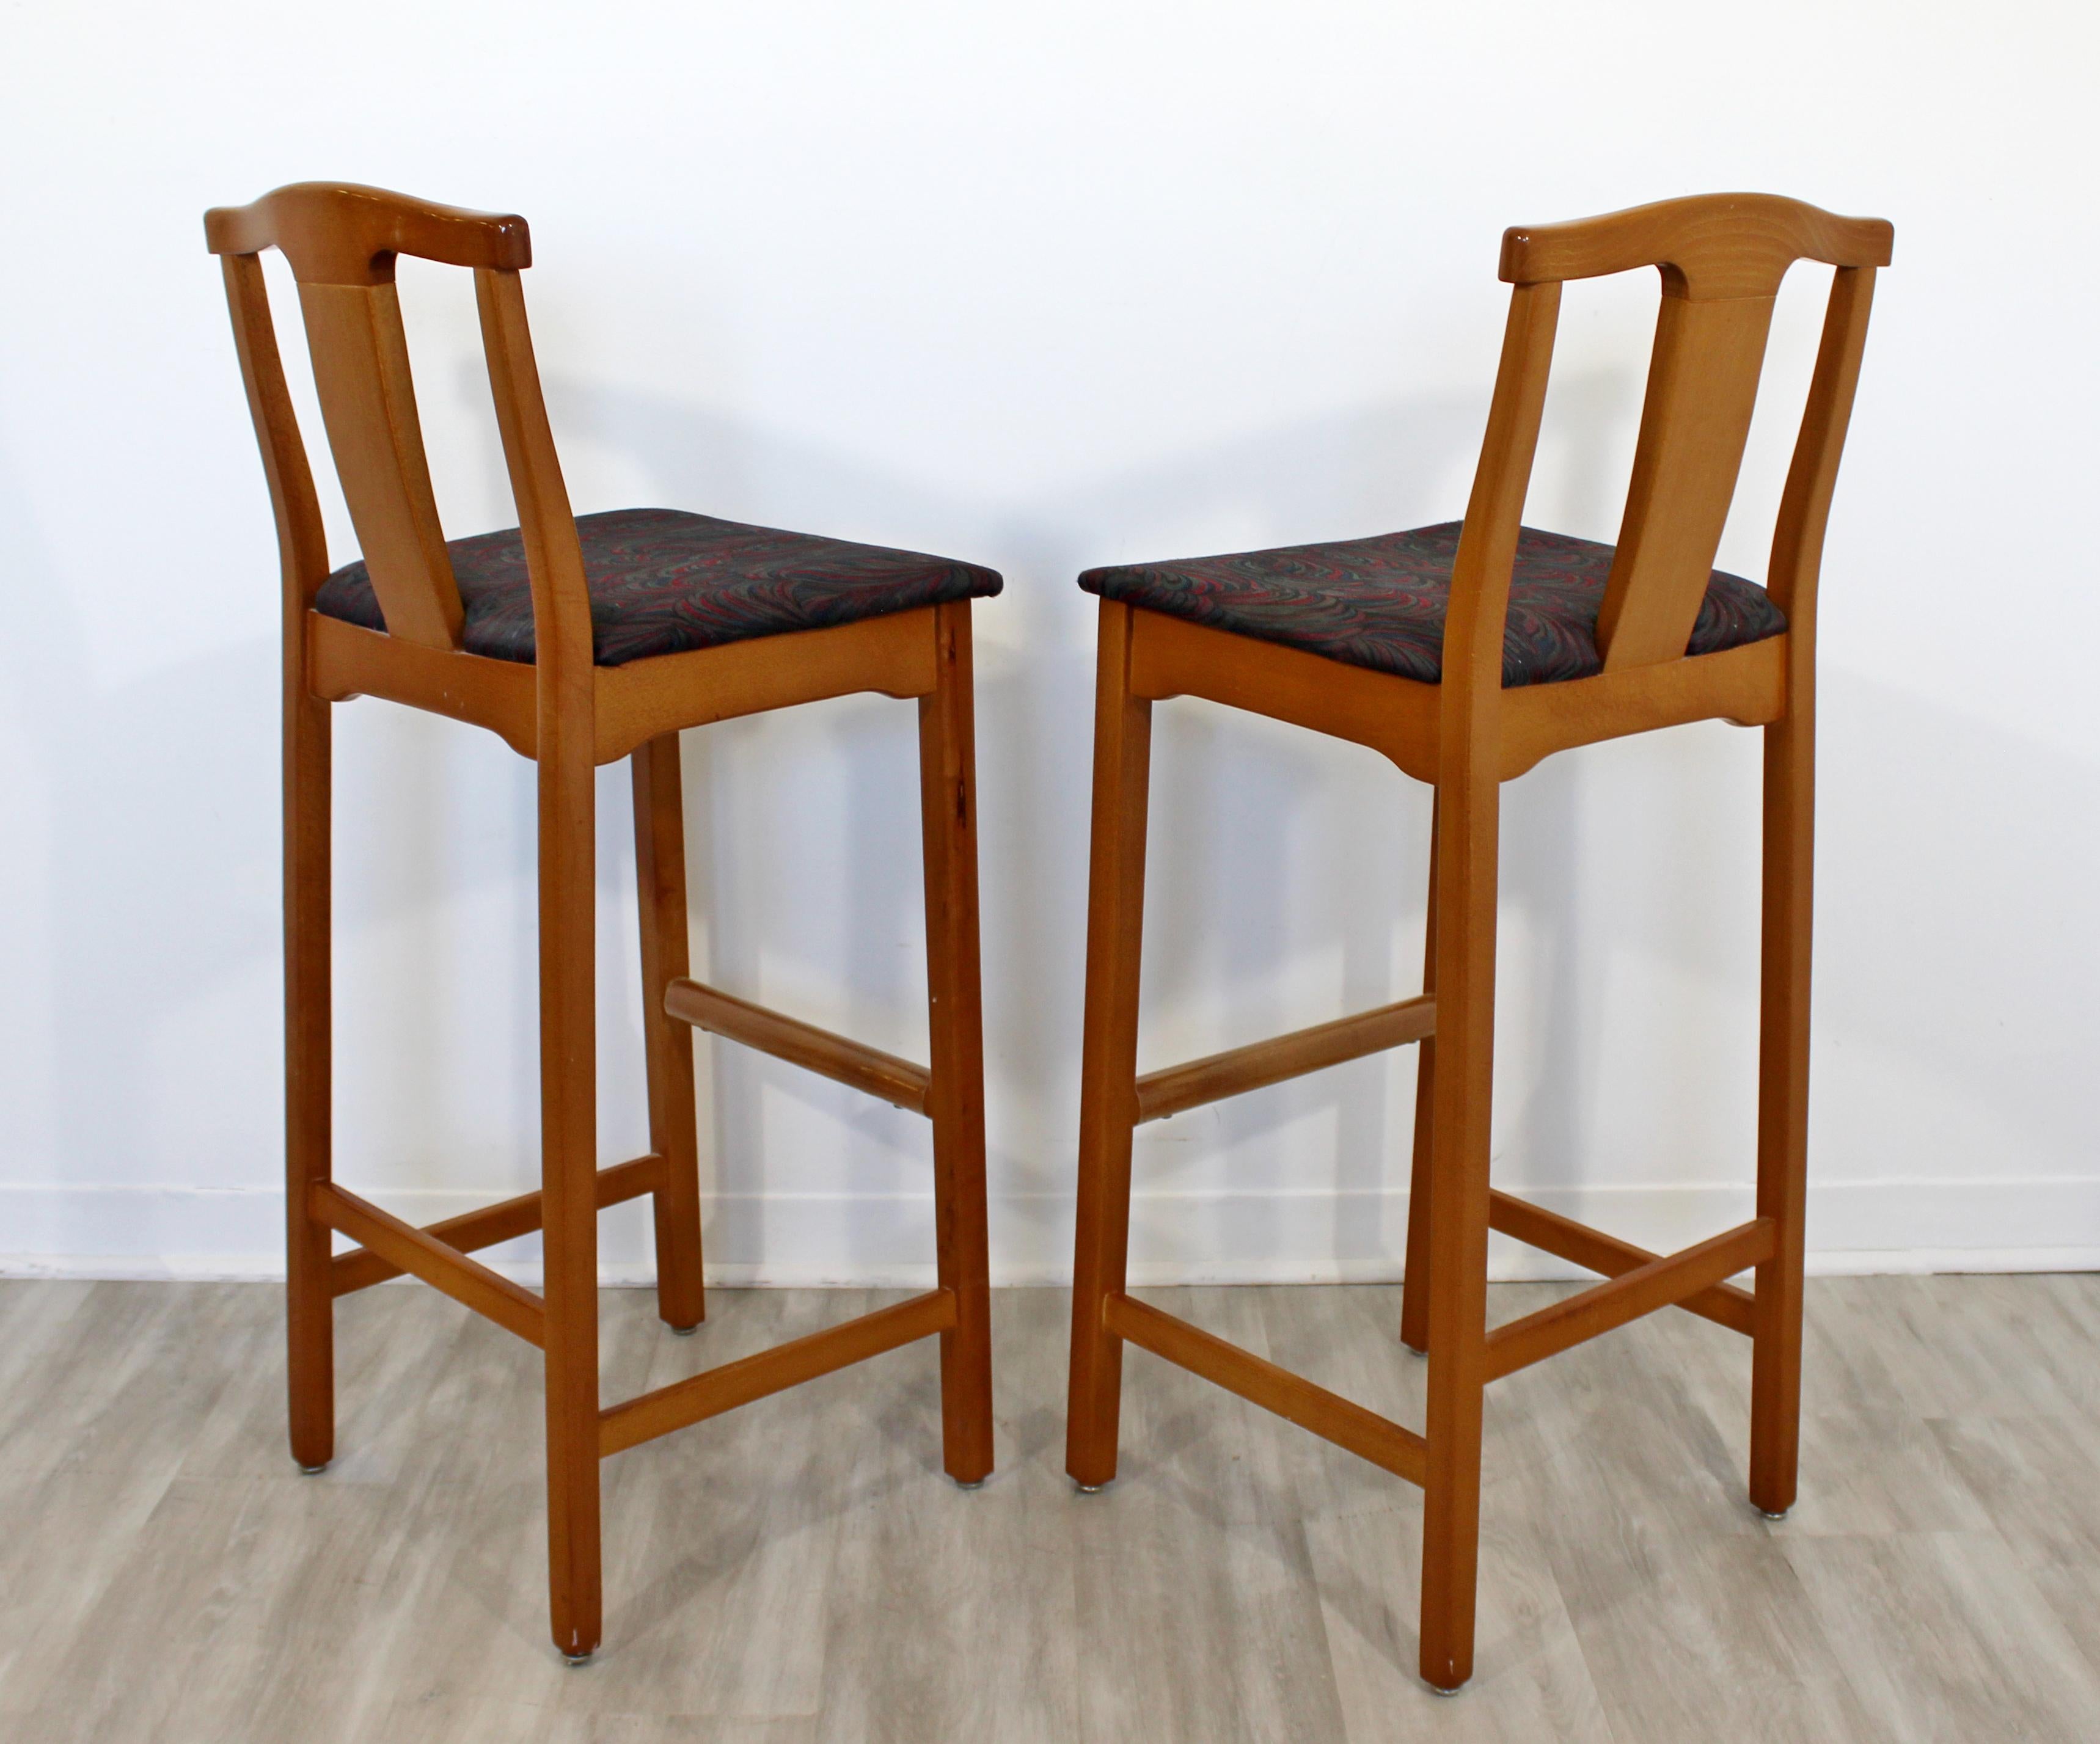 Wood Contemporary Modernist Lowenstein Set of 4 Counter Bar Stools, 1990s For Sale